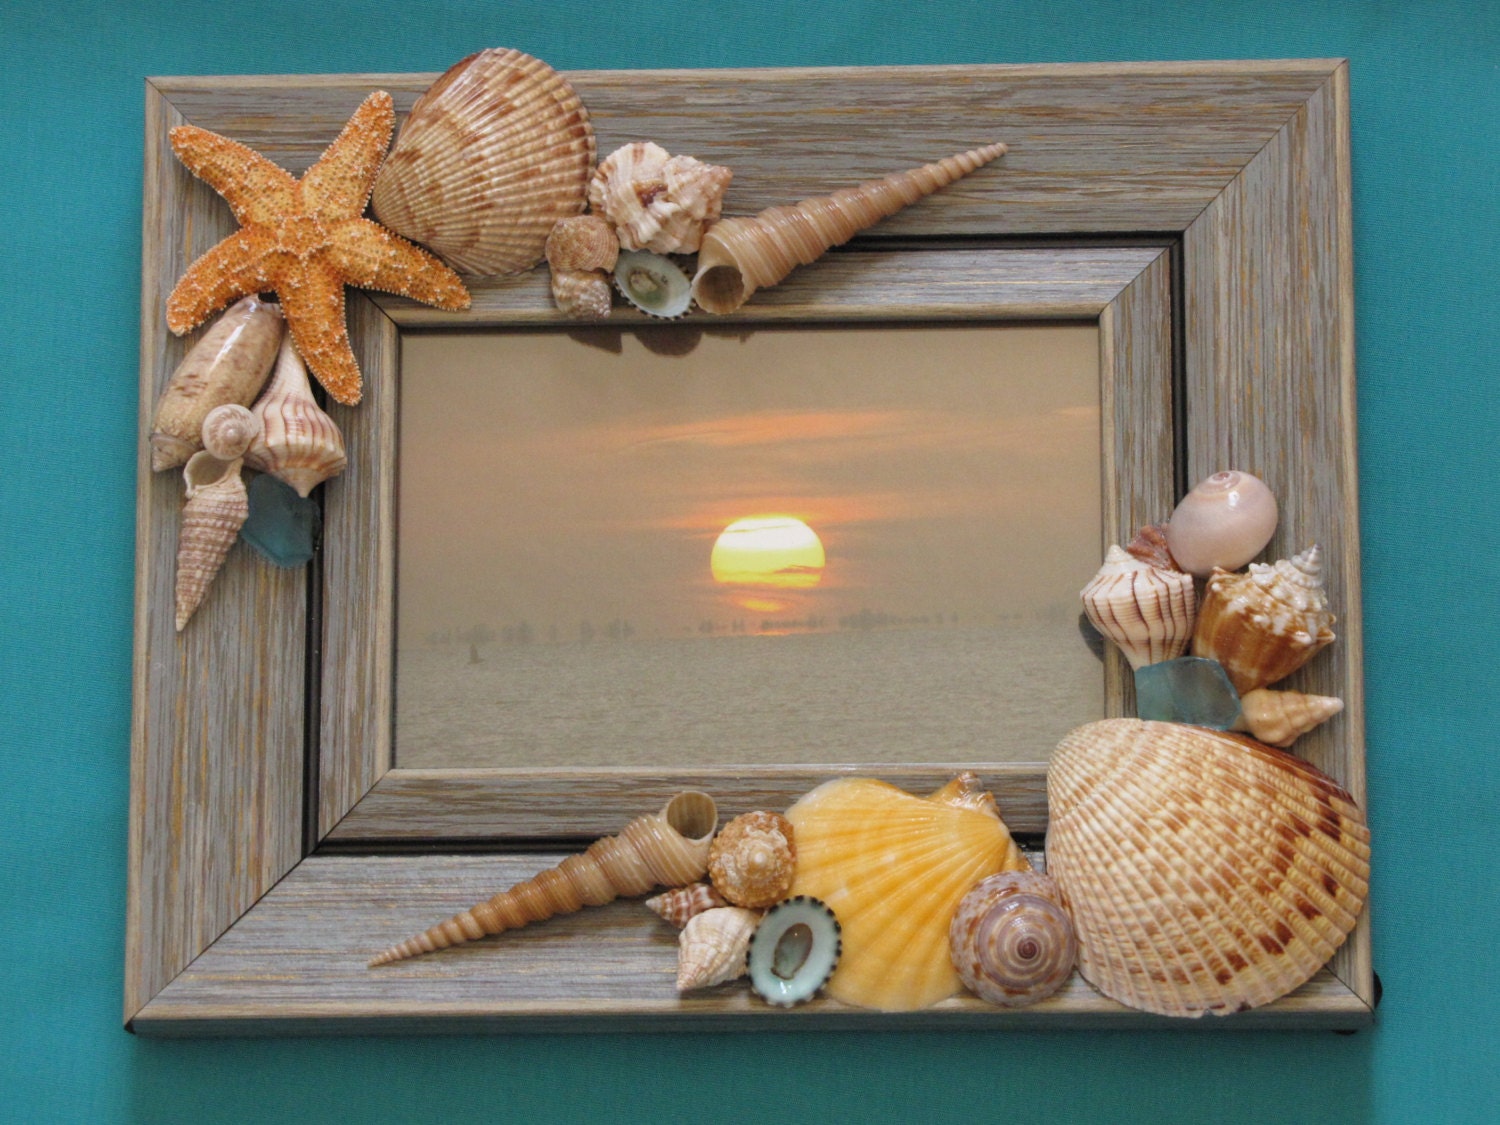 Beach picture frames